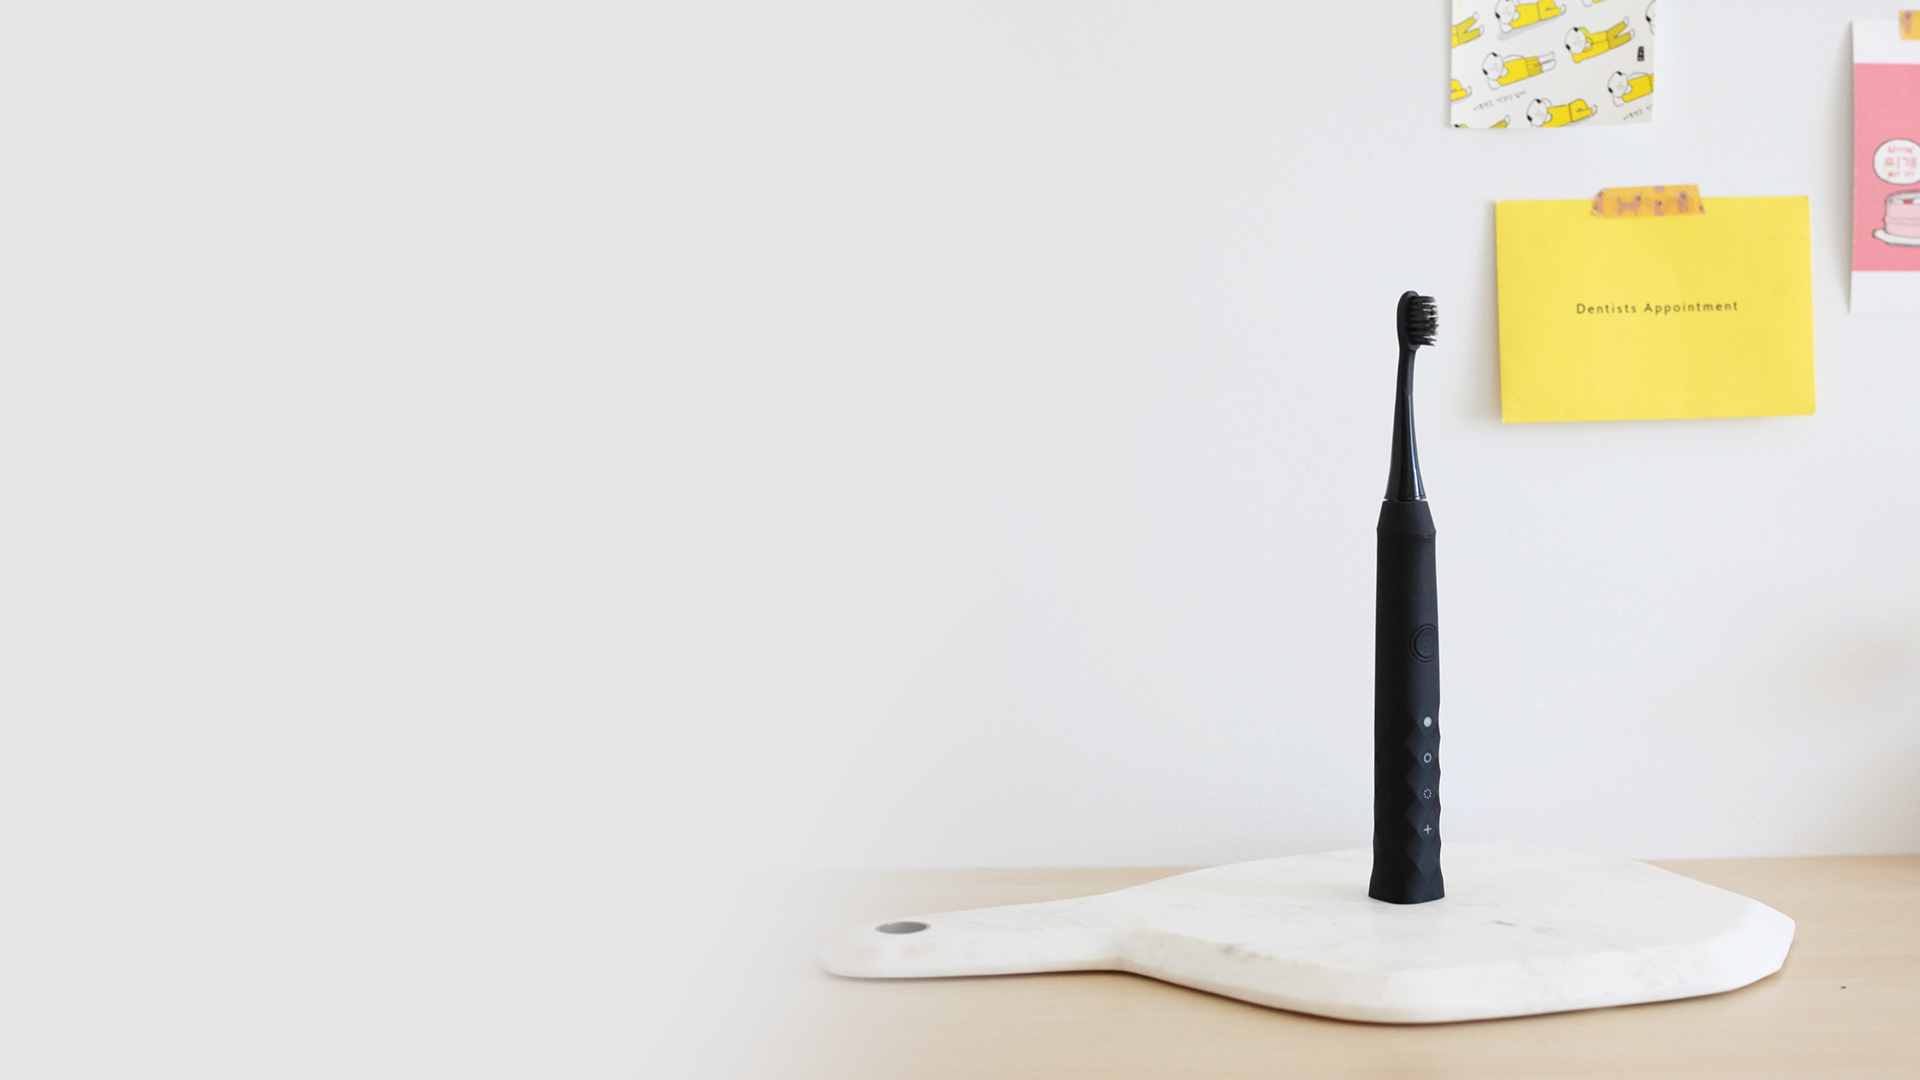 Black electric tooth brush on desk with sticky notes.